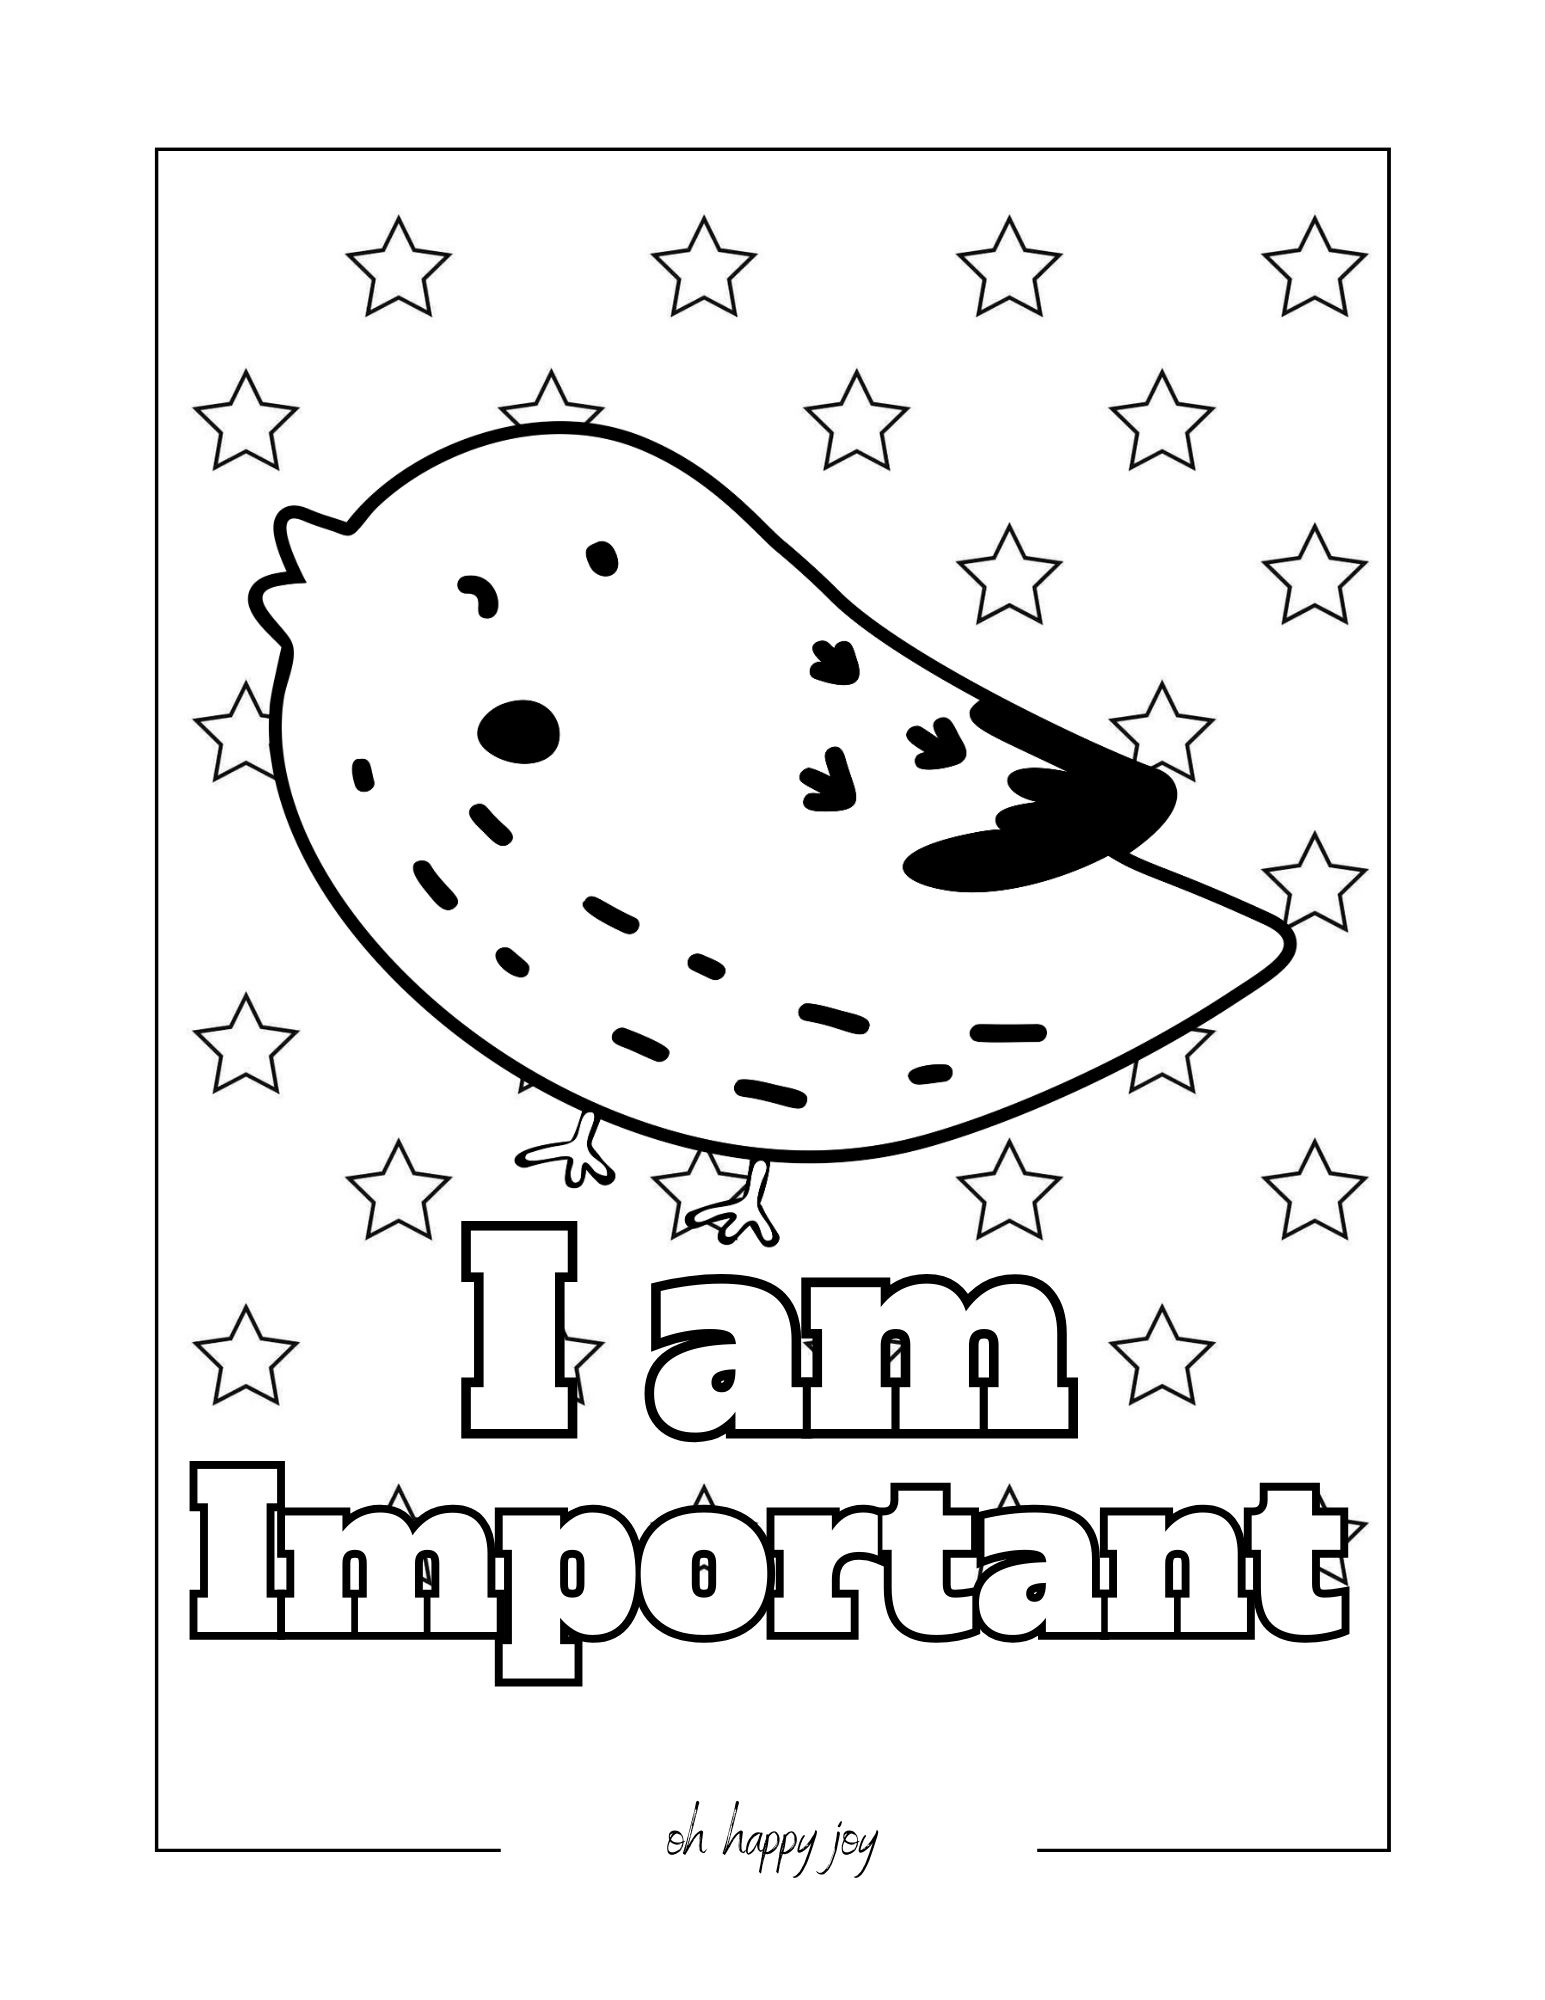 I am important affirmation coloring page